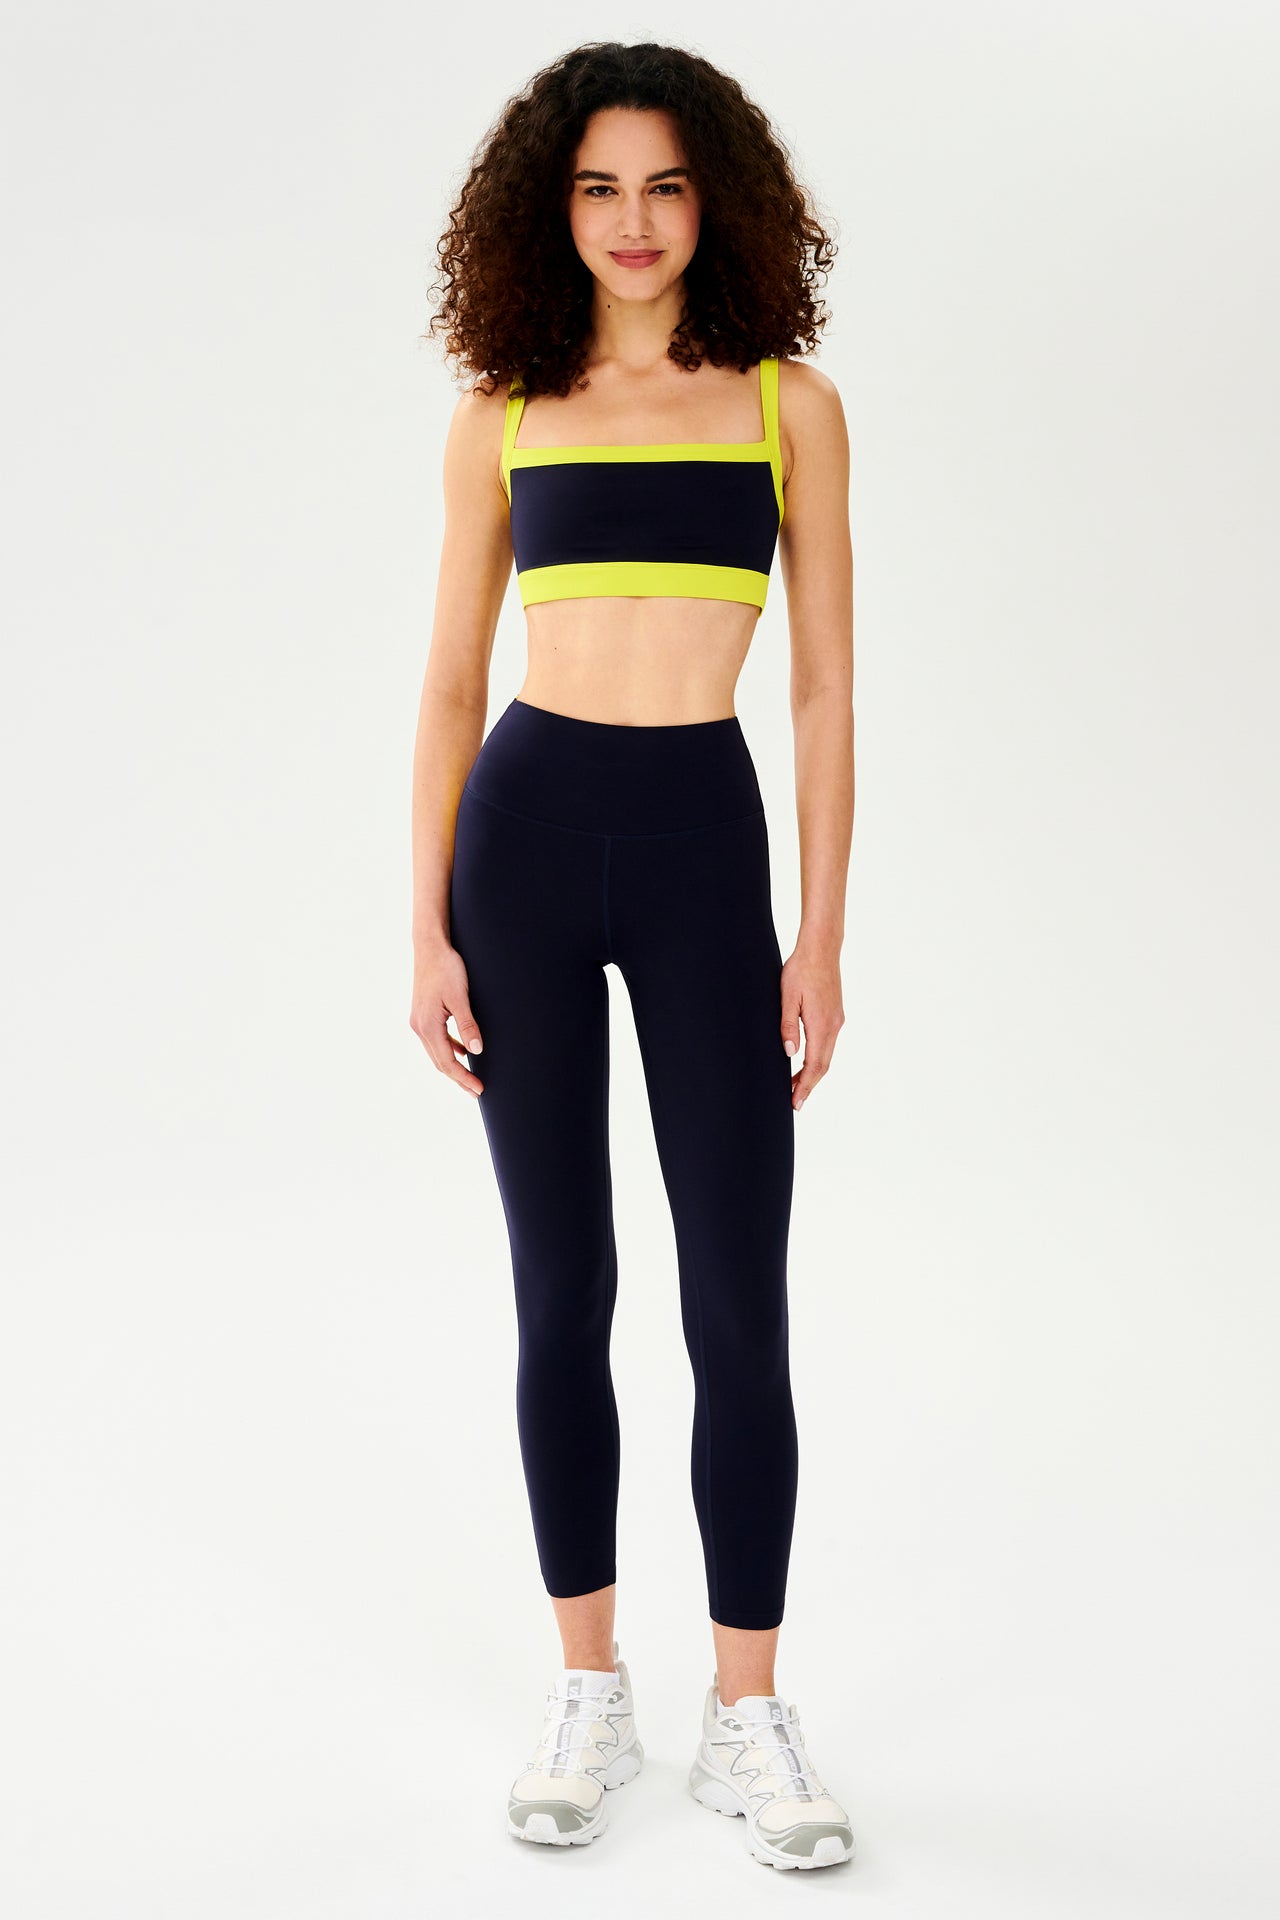 A woman wearing a black and neon Monah Rigor Bra - Indigo/Chartreuse sports bra and leggings designed for comfort and support during a workout by SPLITS59.